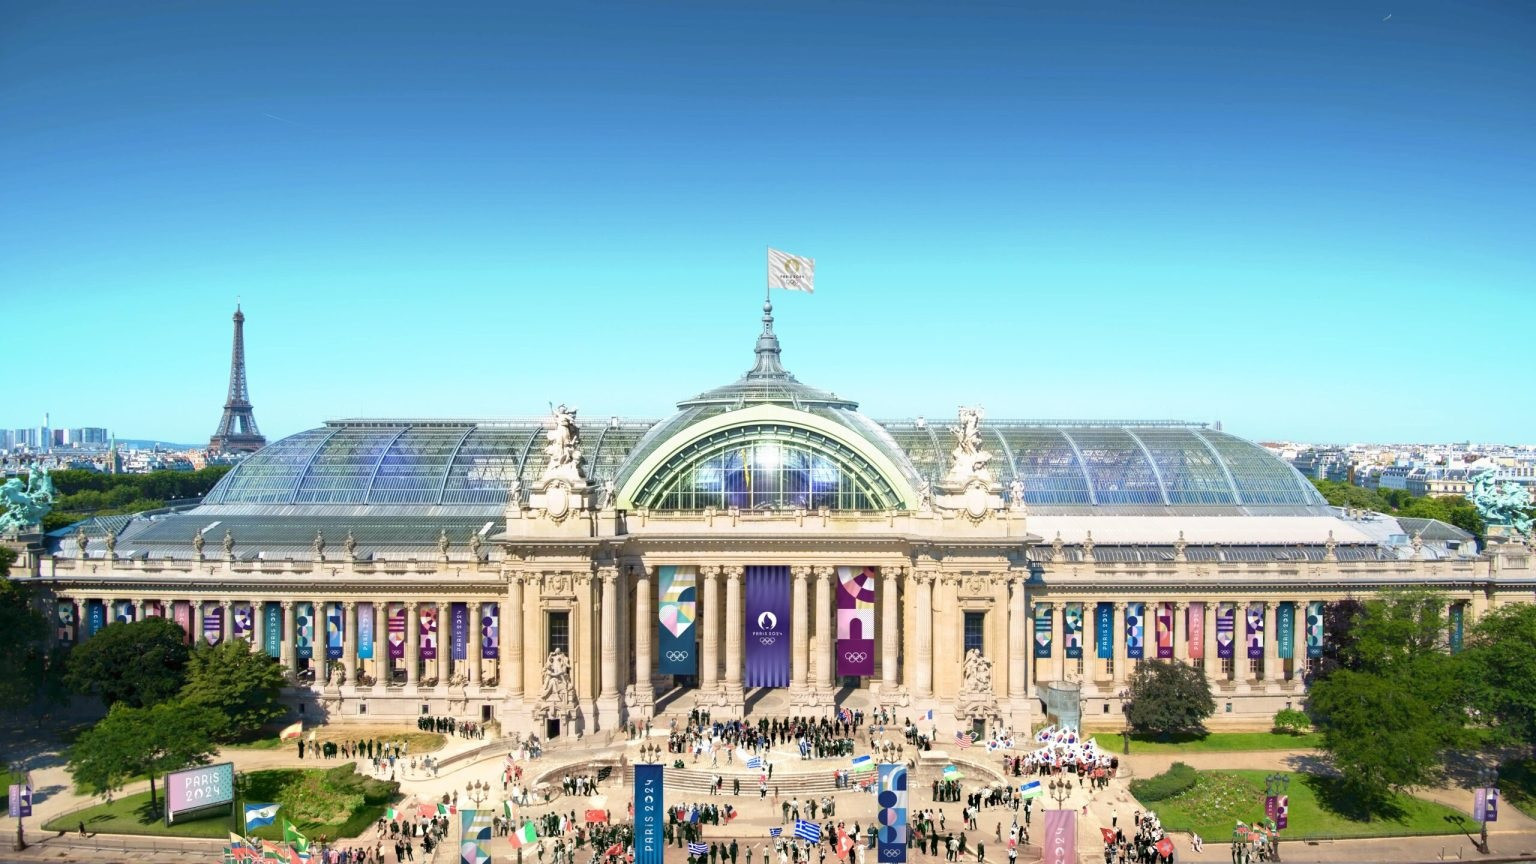 An artist's impression of what the Grand Palais will look like during the Olympics as operational tests were carried out behind closed doors ©Paris 2024